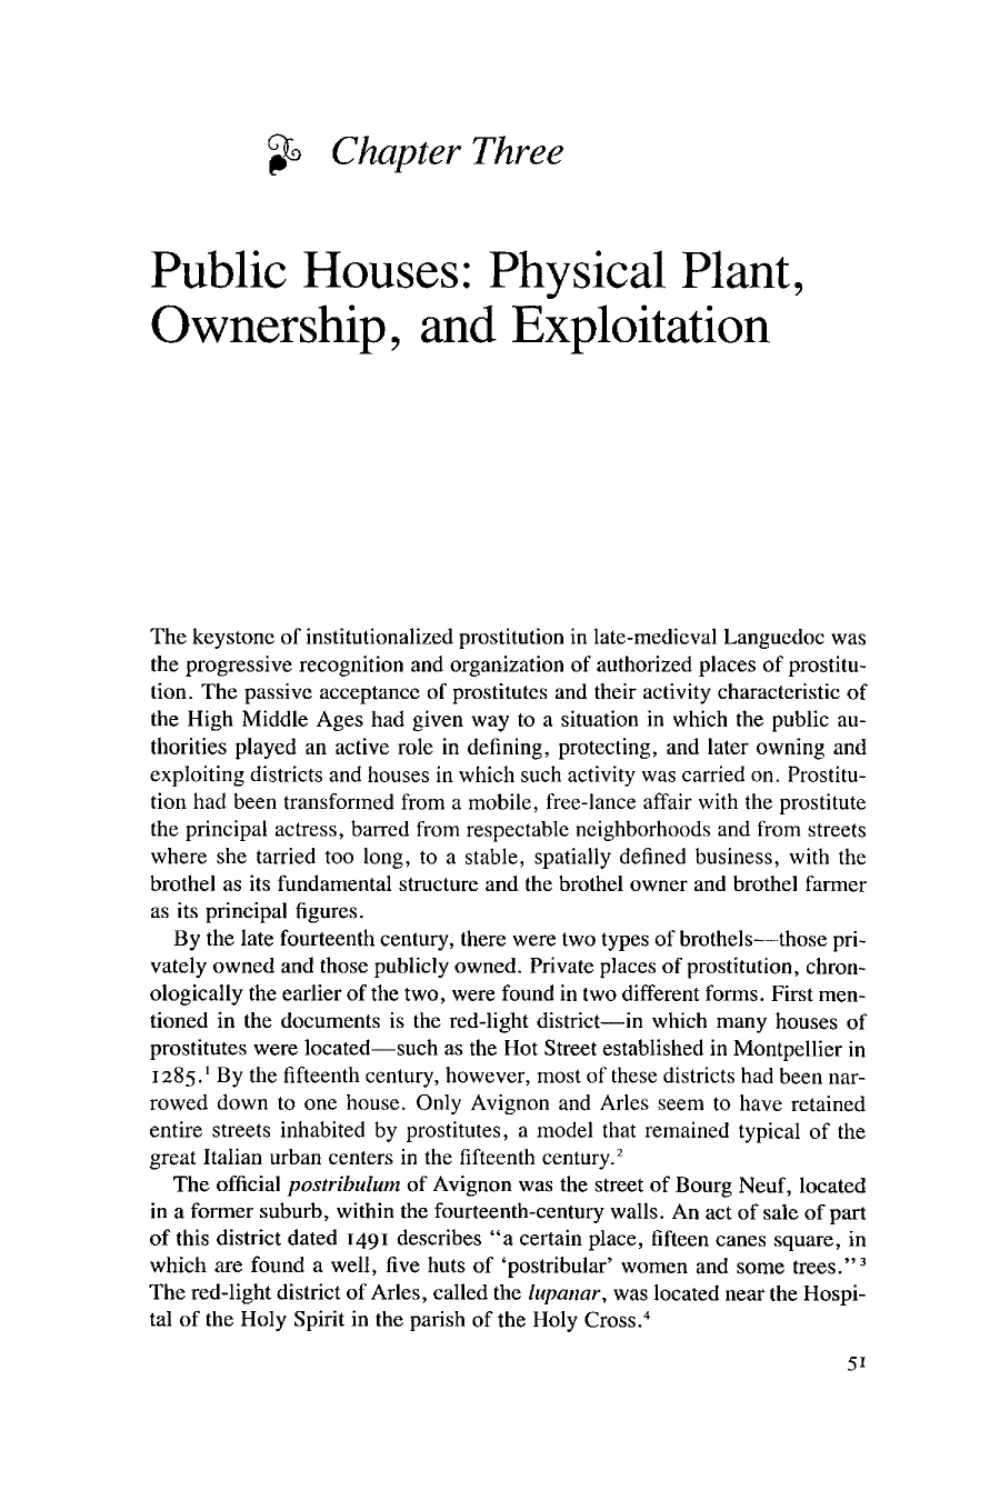 3. Public Houses: Physical Plant, Ownership, and Exploitation